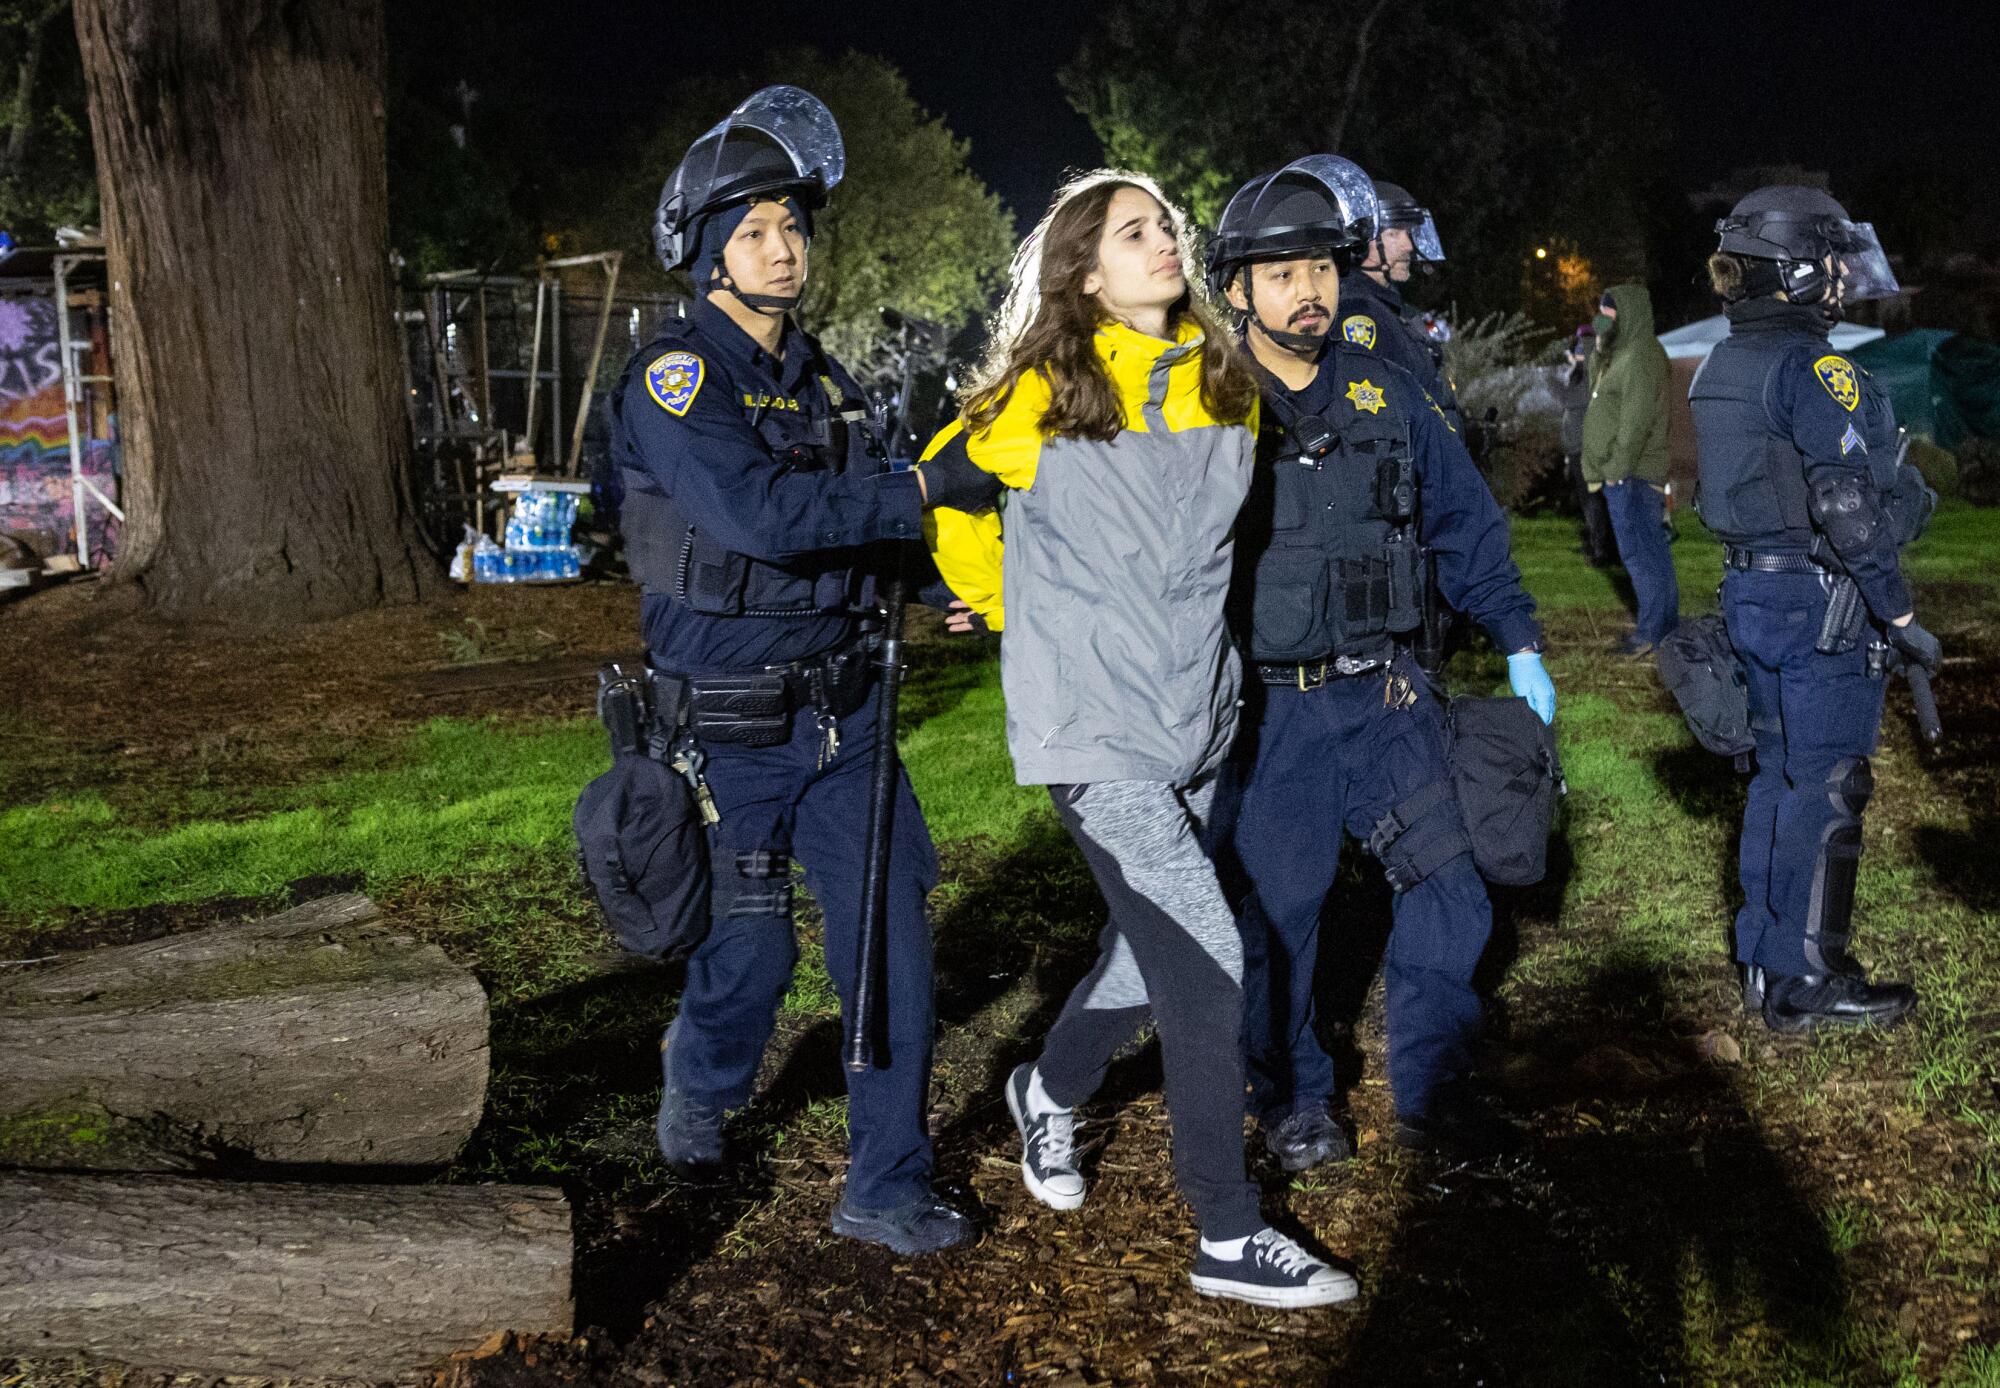 Authorities made multiple arrests as they cleared People's Park in Berkeley.